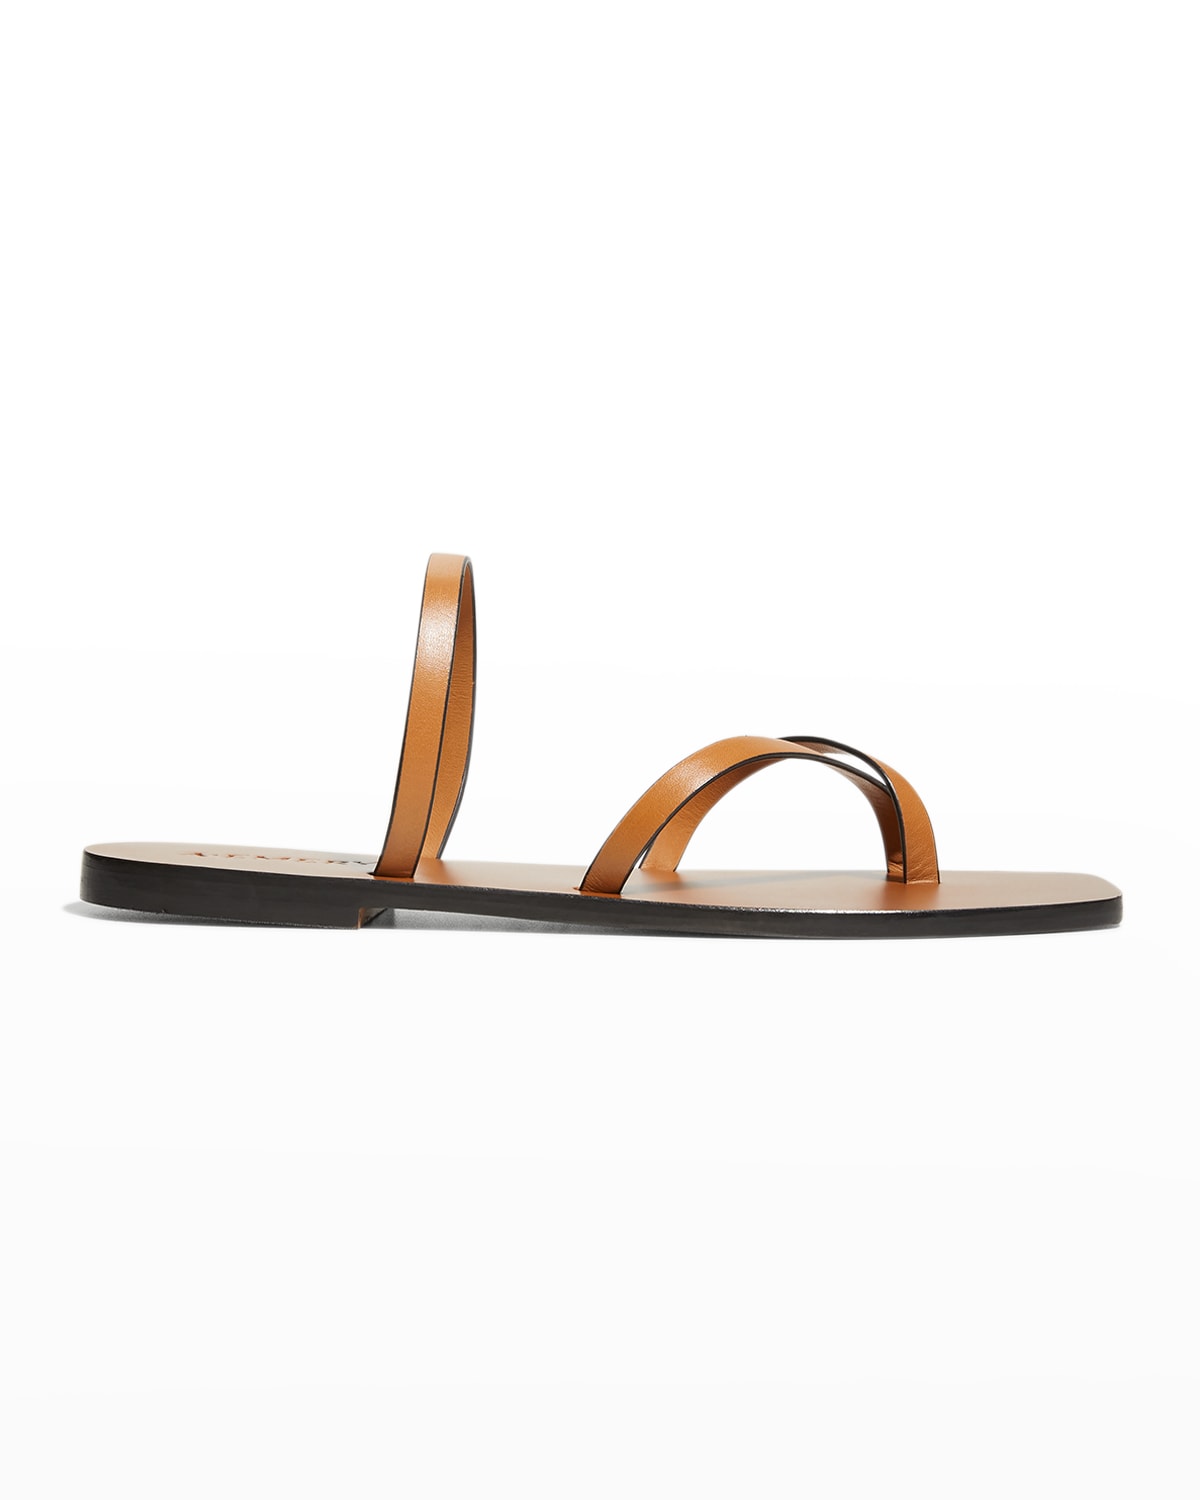 A. Emery Colby Leather Crisscross Slide Sandals